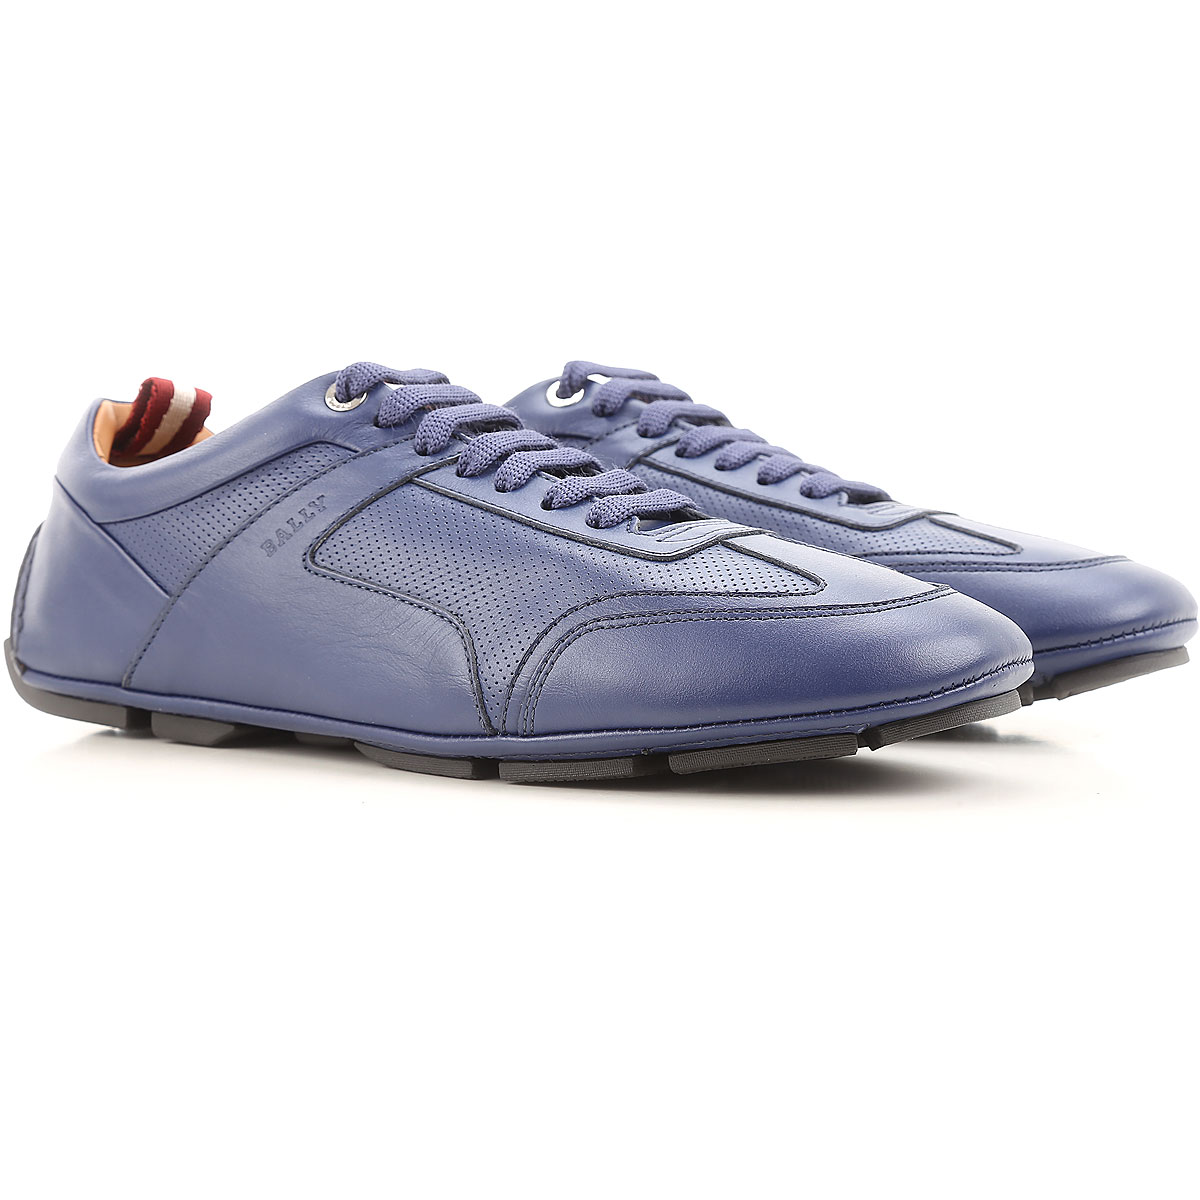 Mens Shoes Bally, Style code: 6213007-huck-f0